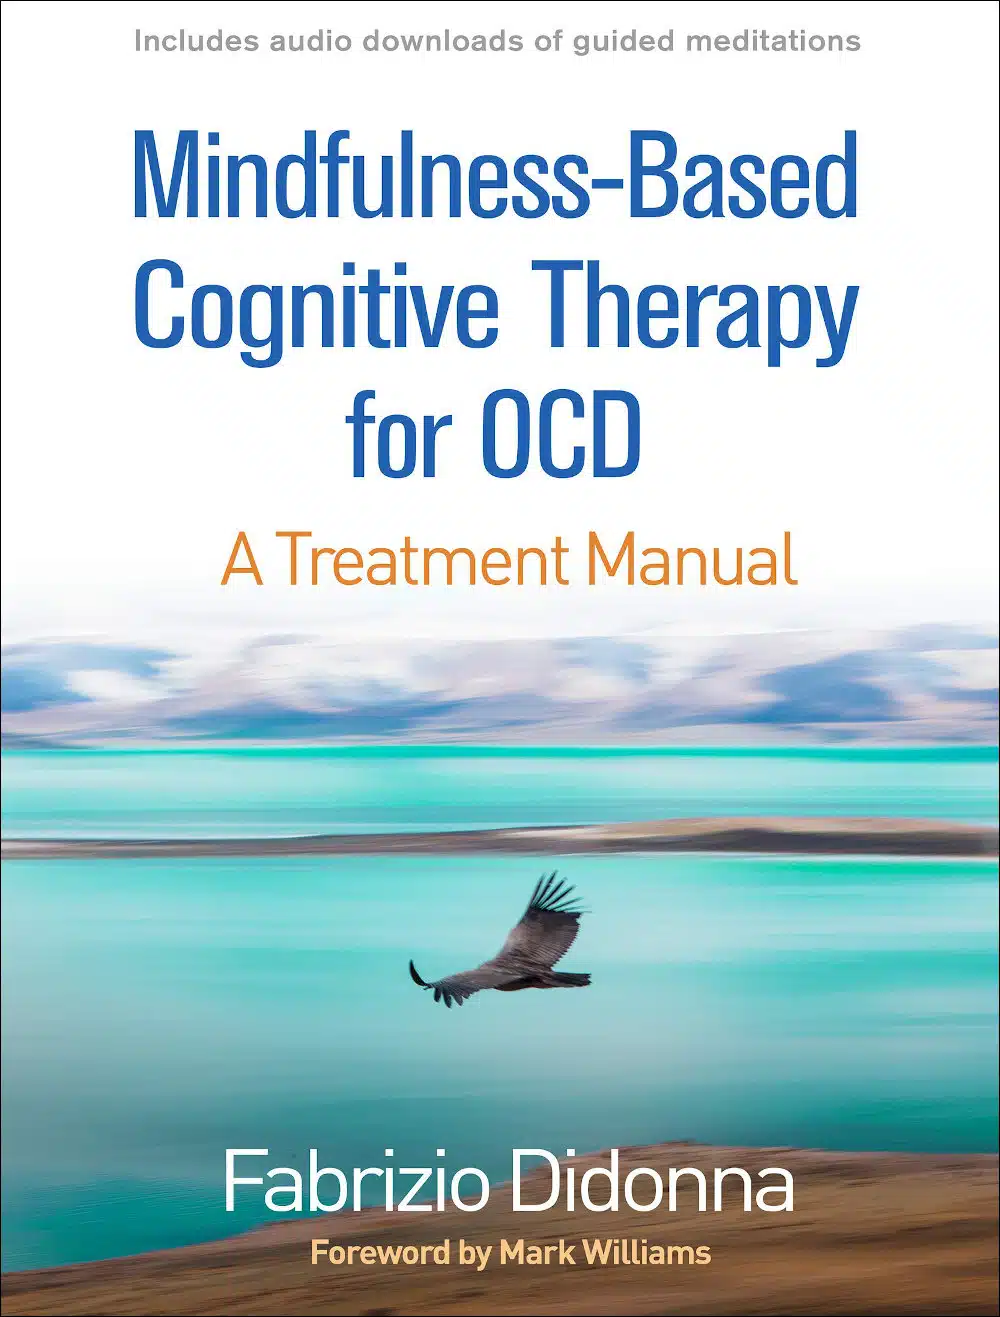 Mindfulness-Based Cognitive-Therapy for OCD (2019) - Recensione